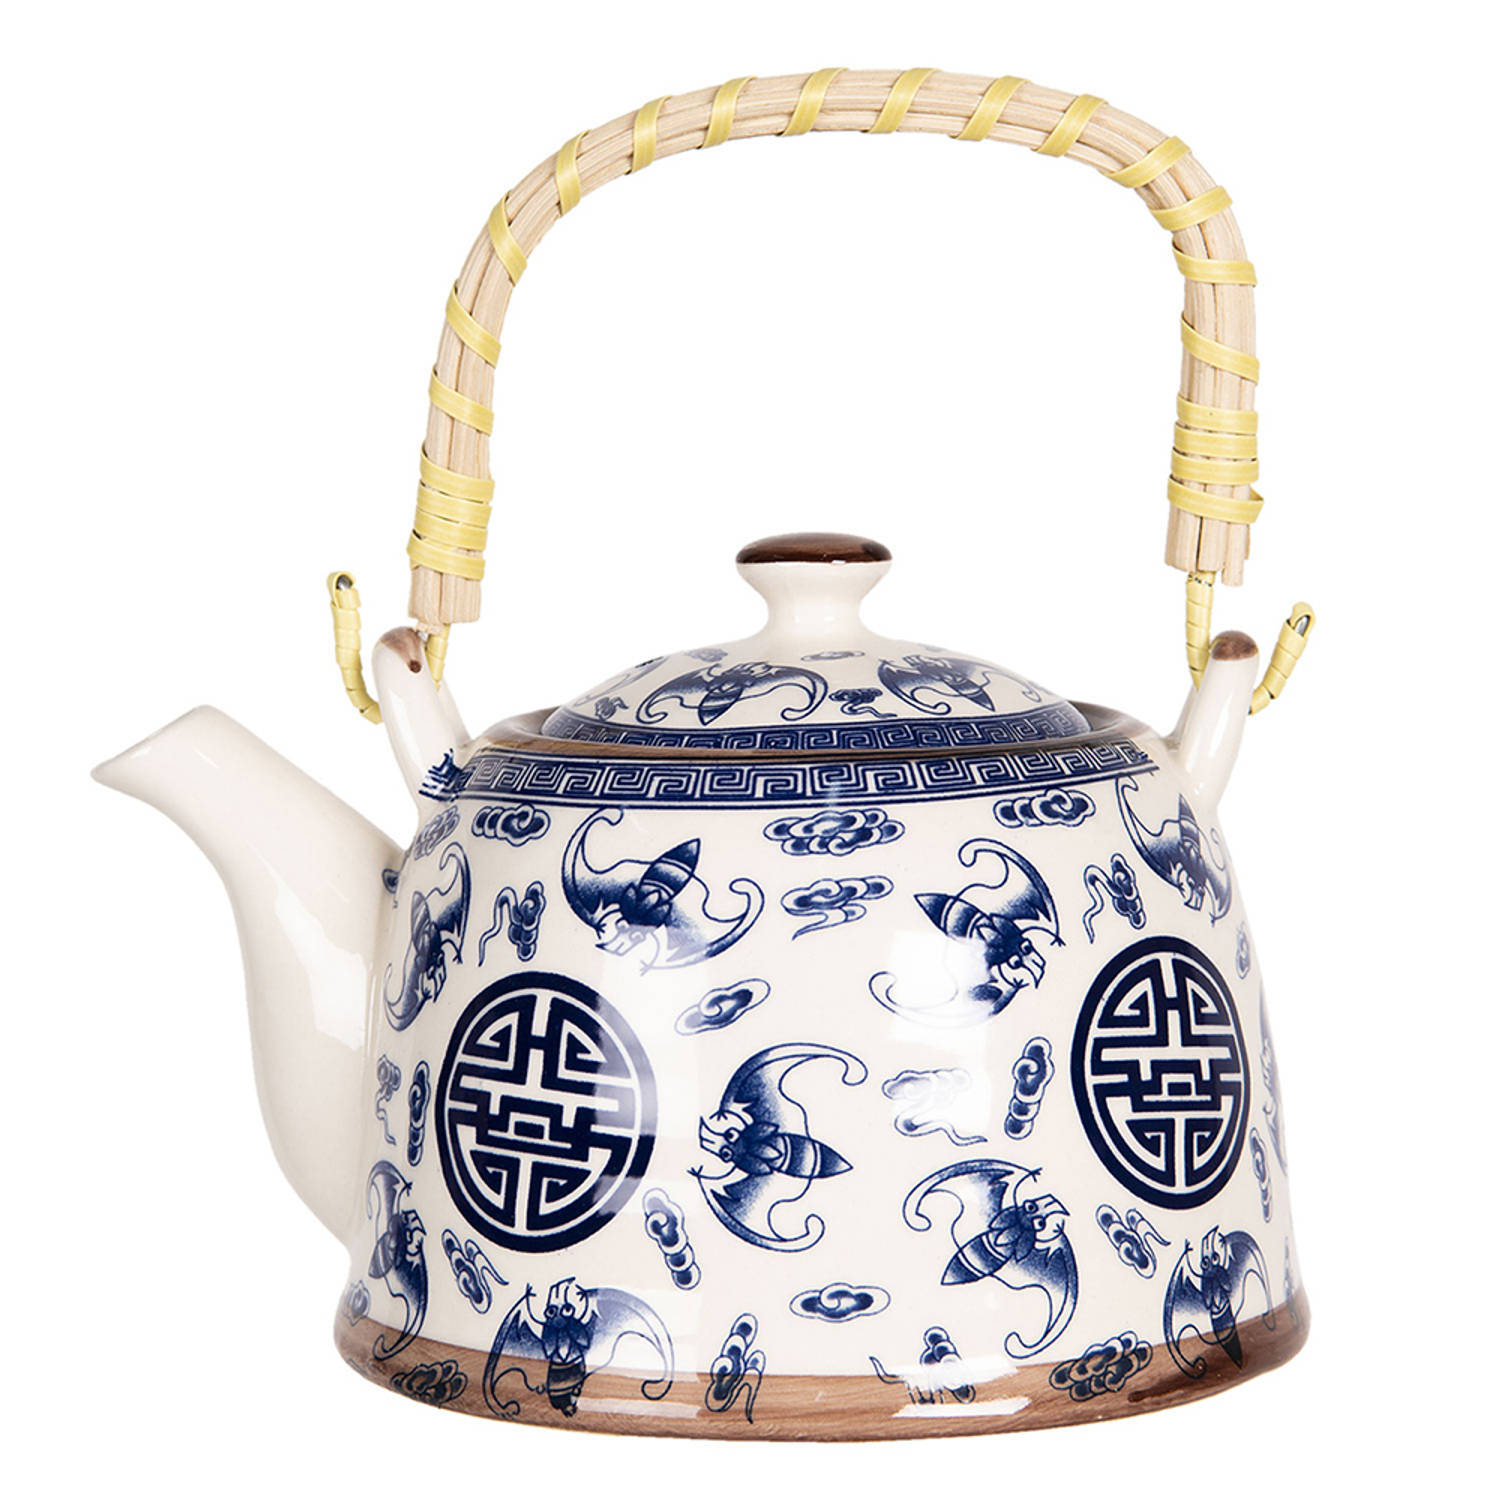 HAES DECO Chinese Theepot Porselein Blauw Chinees Teken Theepot 800 ml Traditioneel Theeservies, The